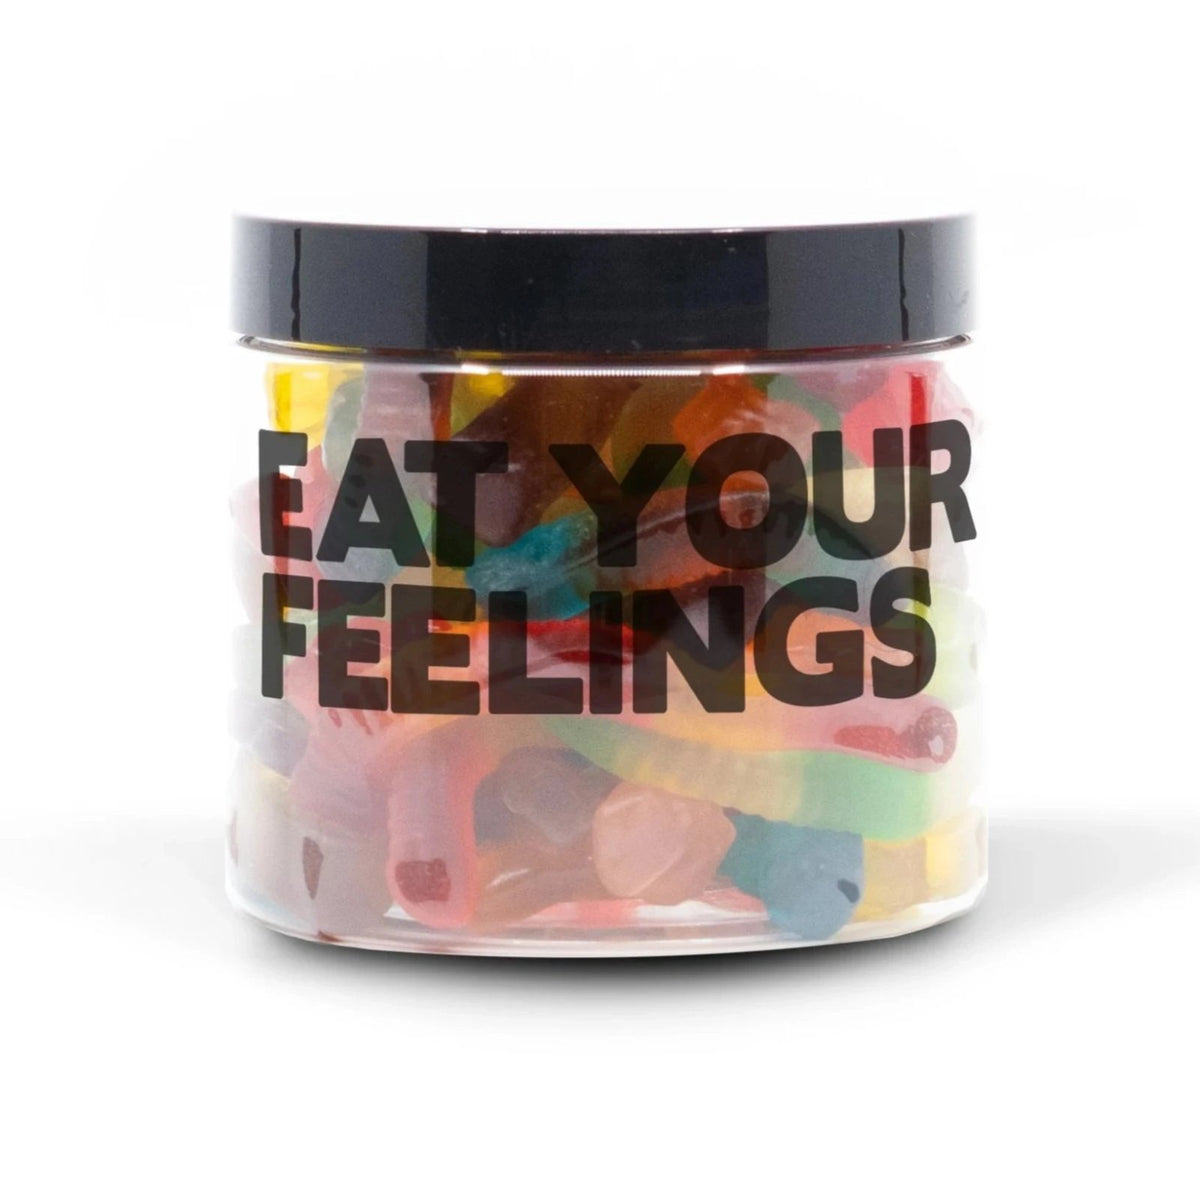 &quot;Eat Your Feelings&quot; Candy Tub